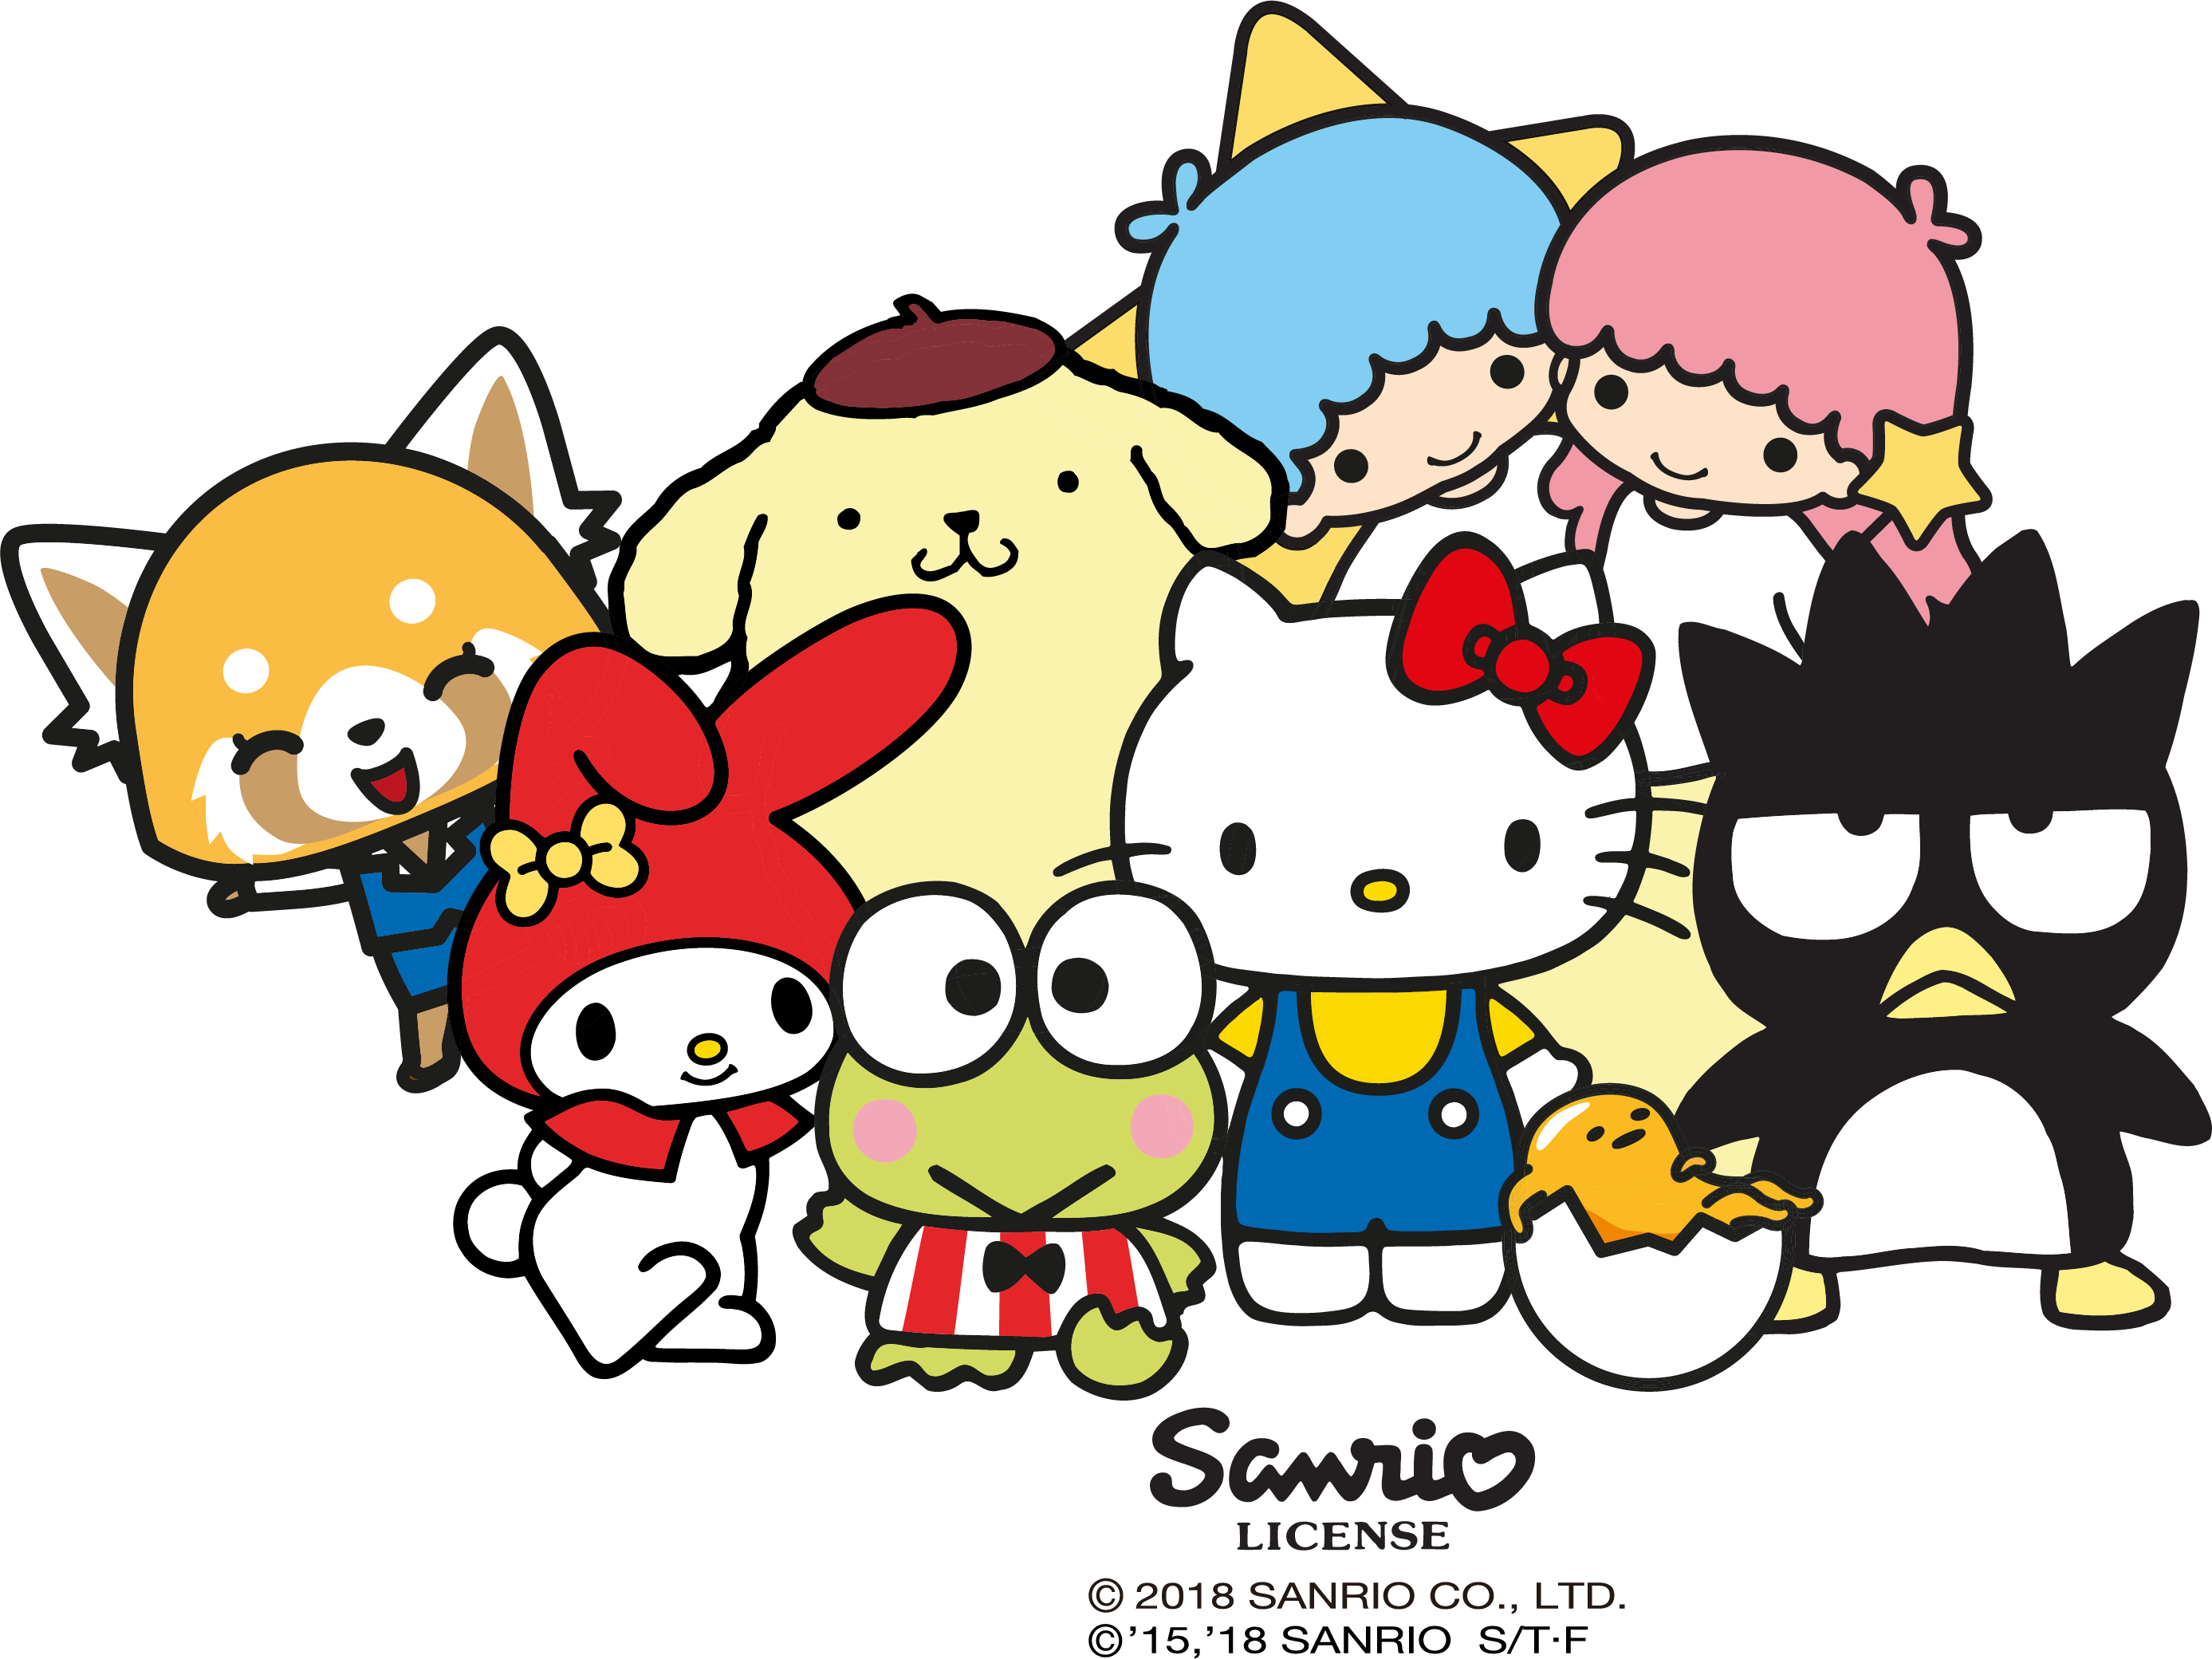 Png Hello Kitty Images Free Download Free Transparent Png Logos